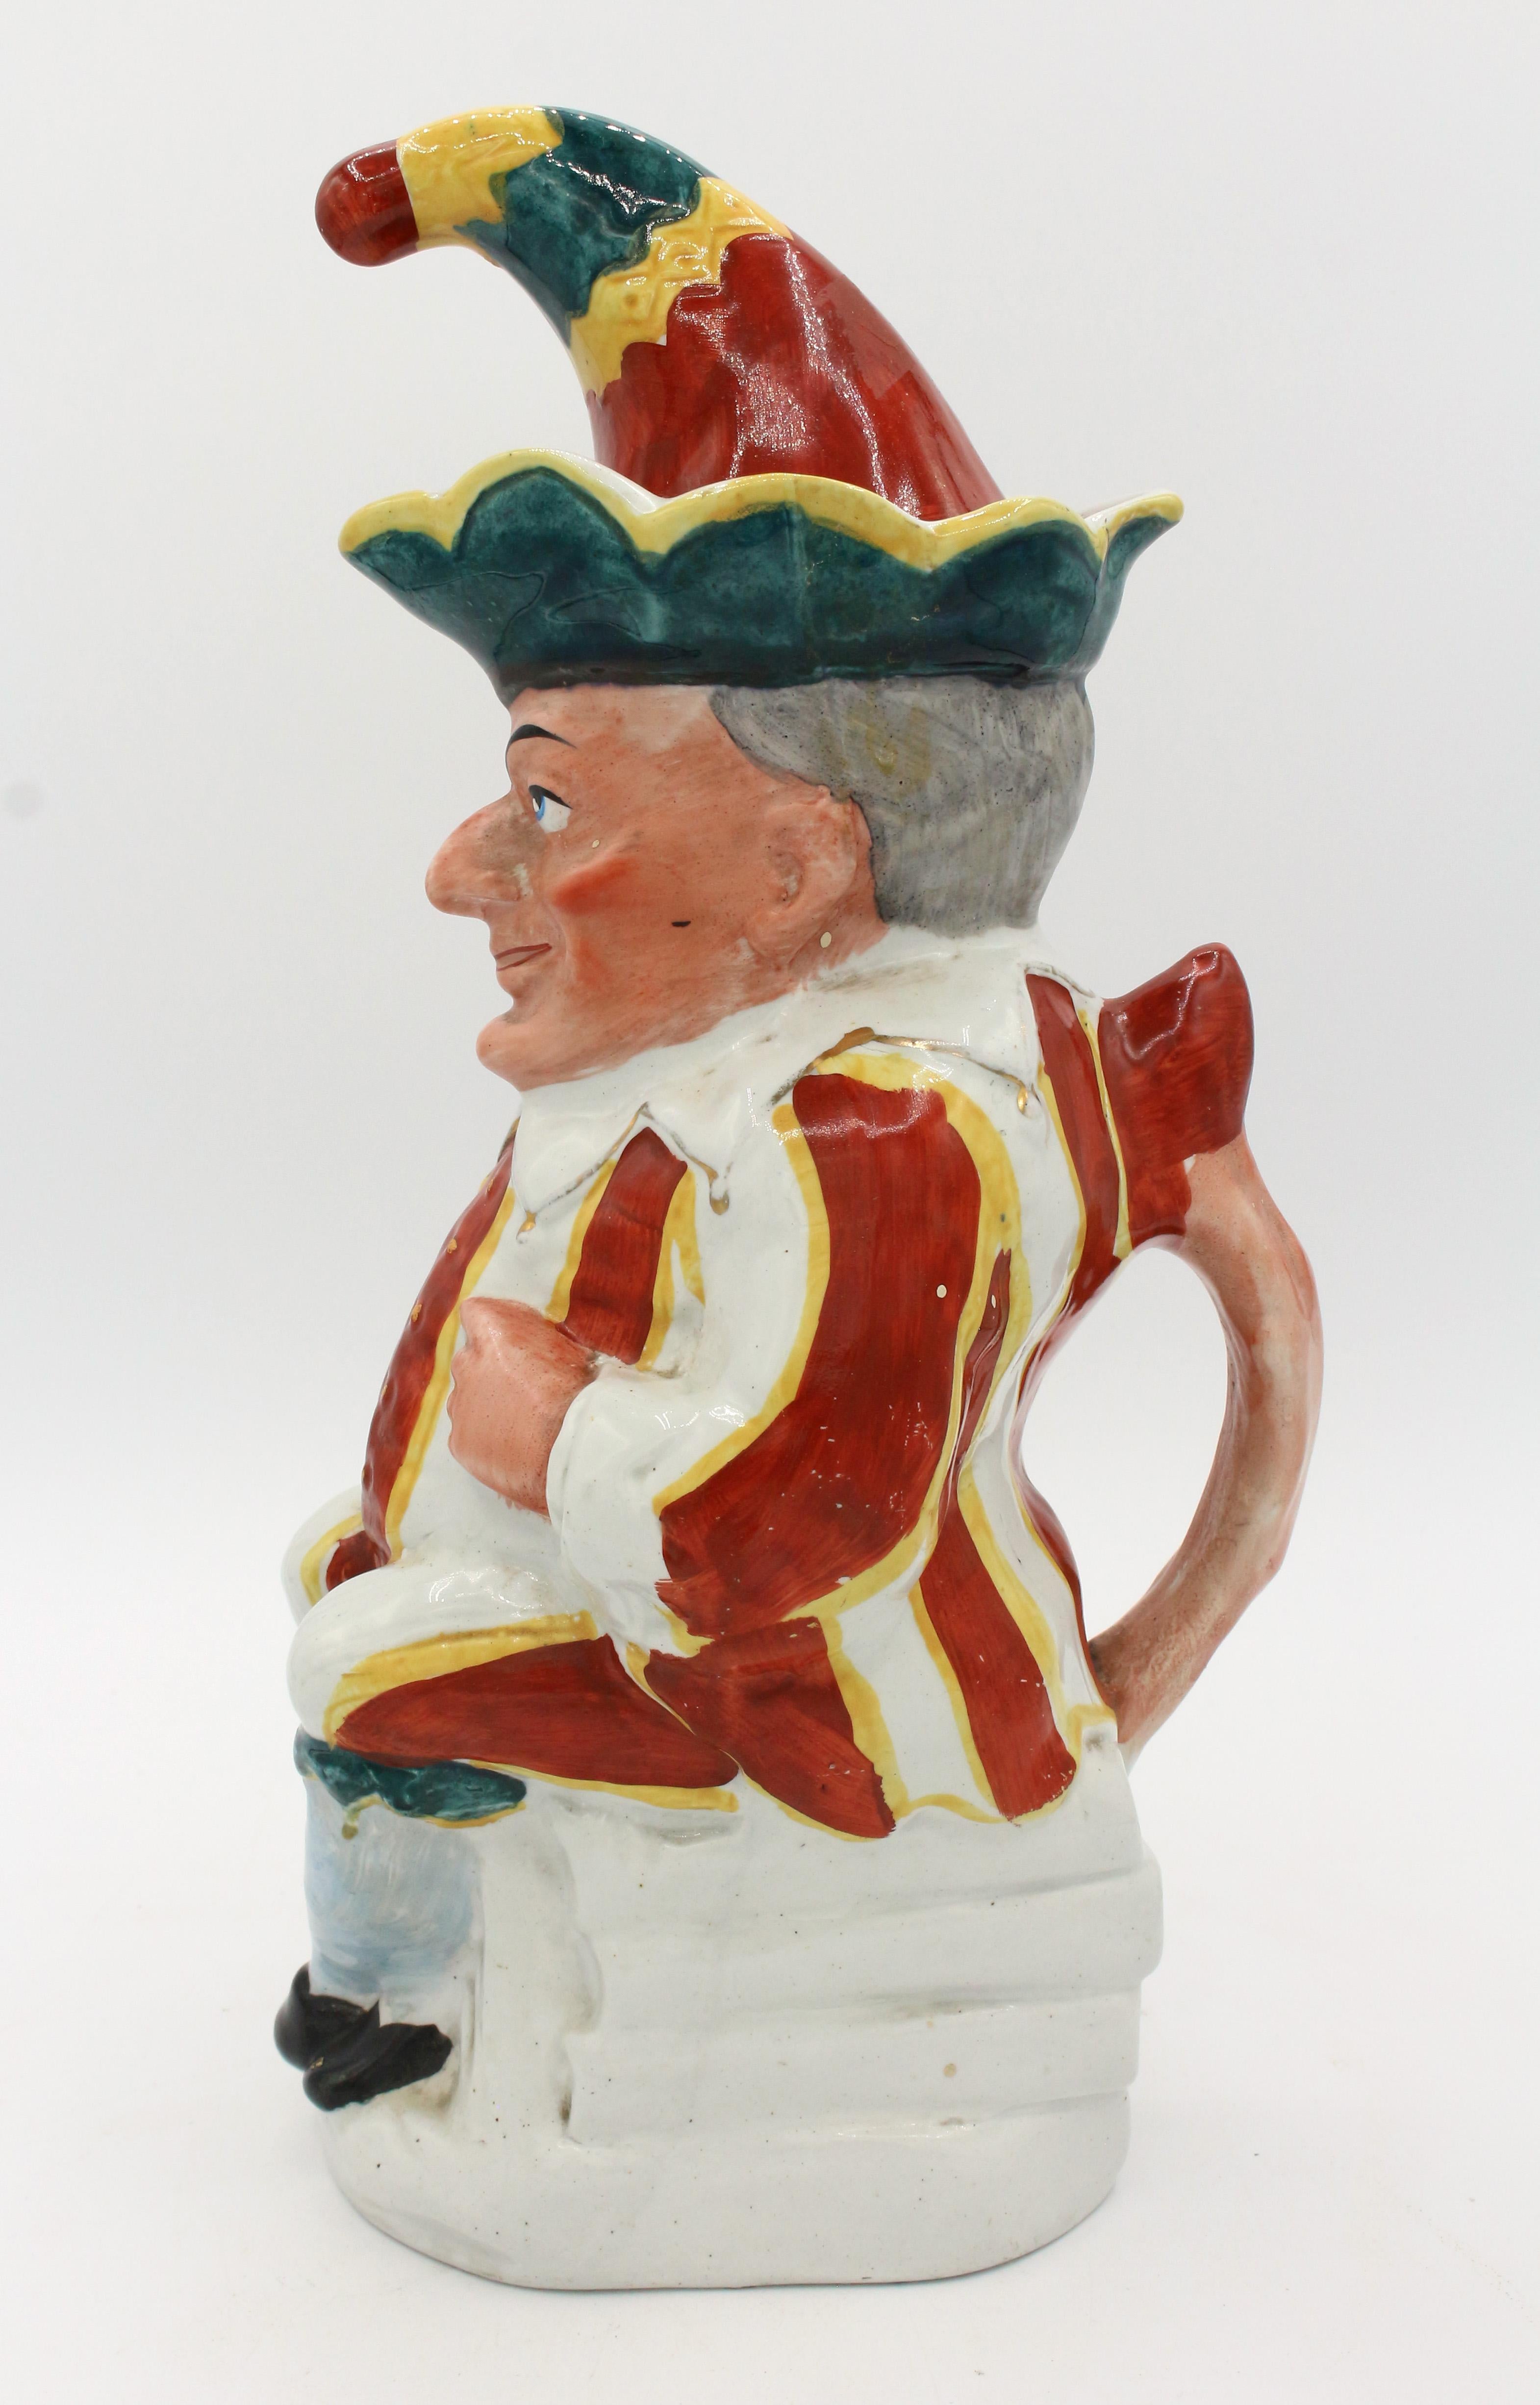 Late Victorian Hilarious Punch figure Toby Jug by William Machin, England, 1889-1910 For Sale